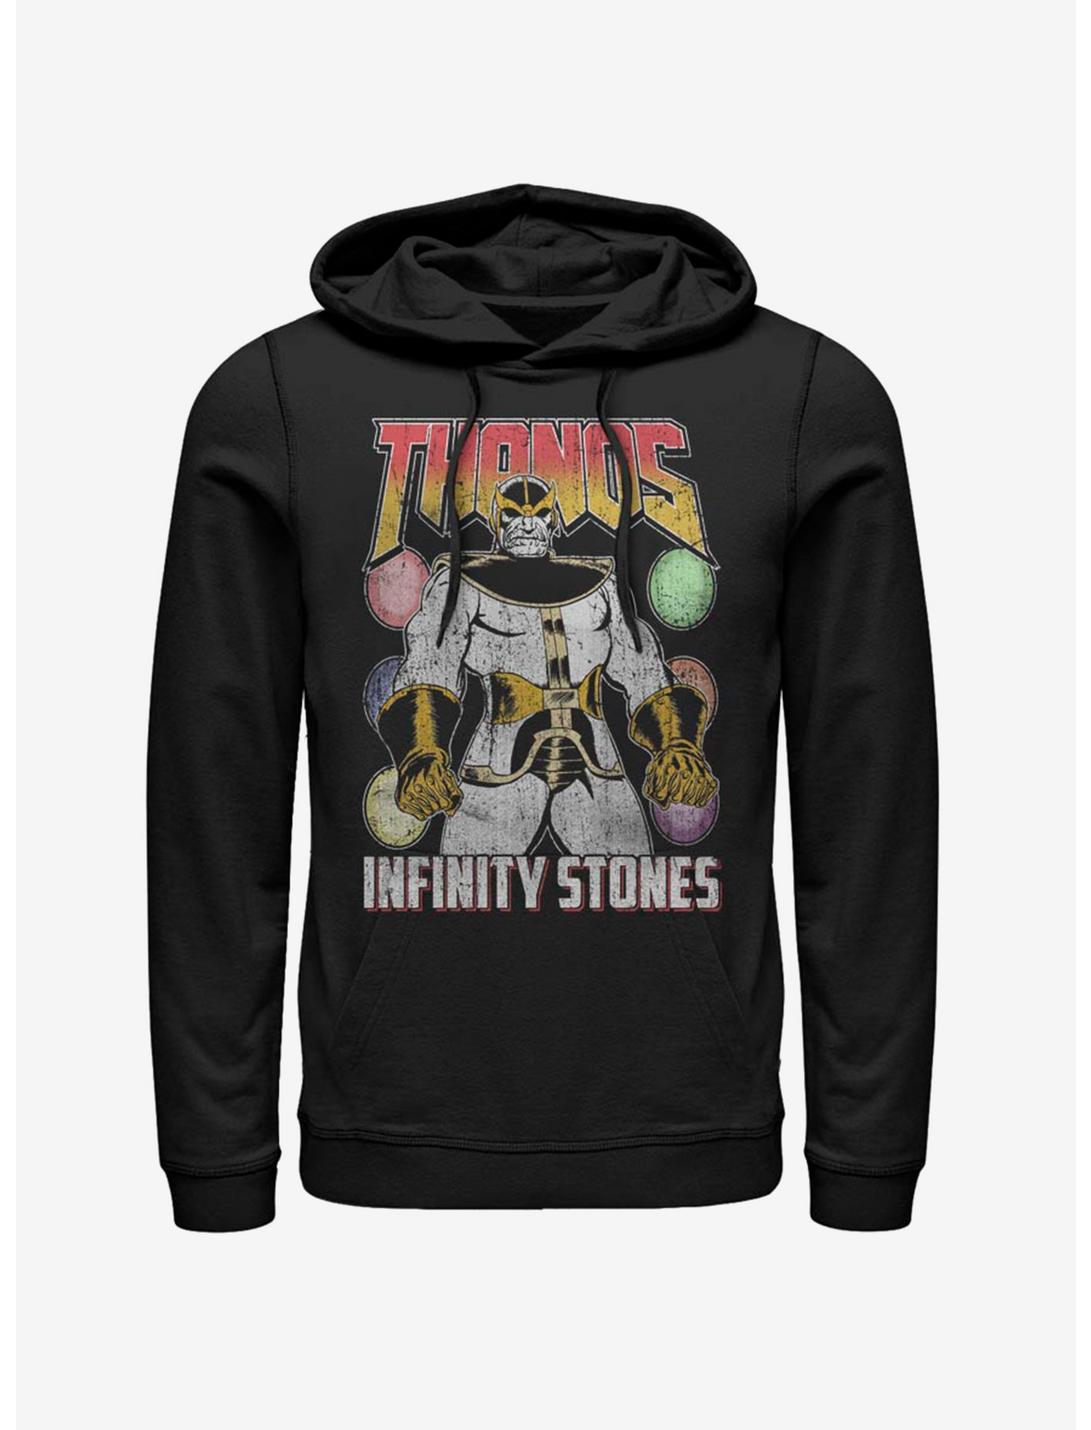 Avengers Thanos And The Infinity Stones Hoodie, BLACK, hi-res